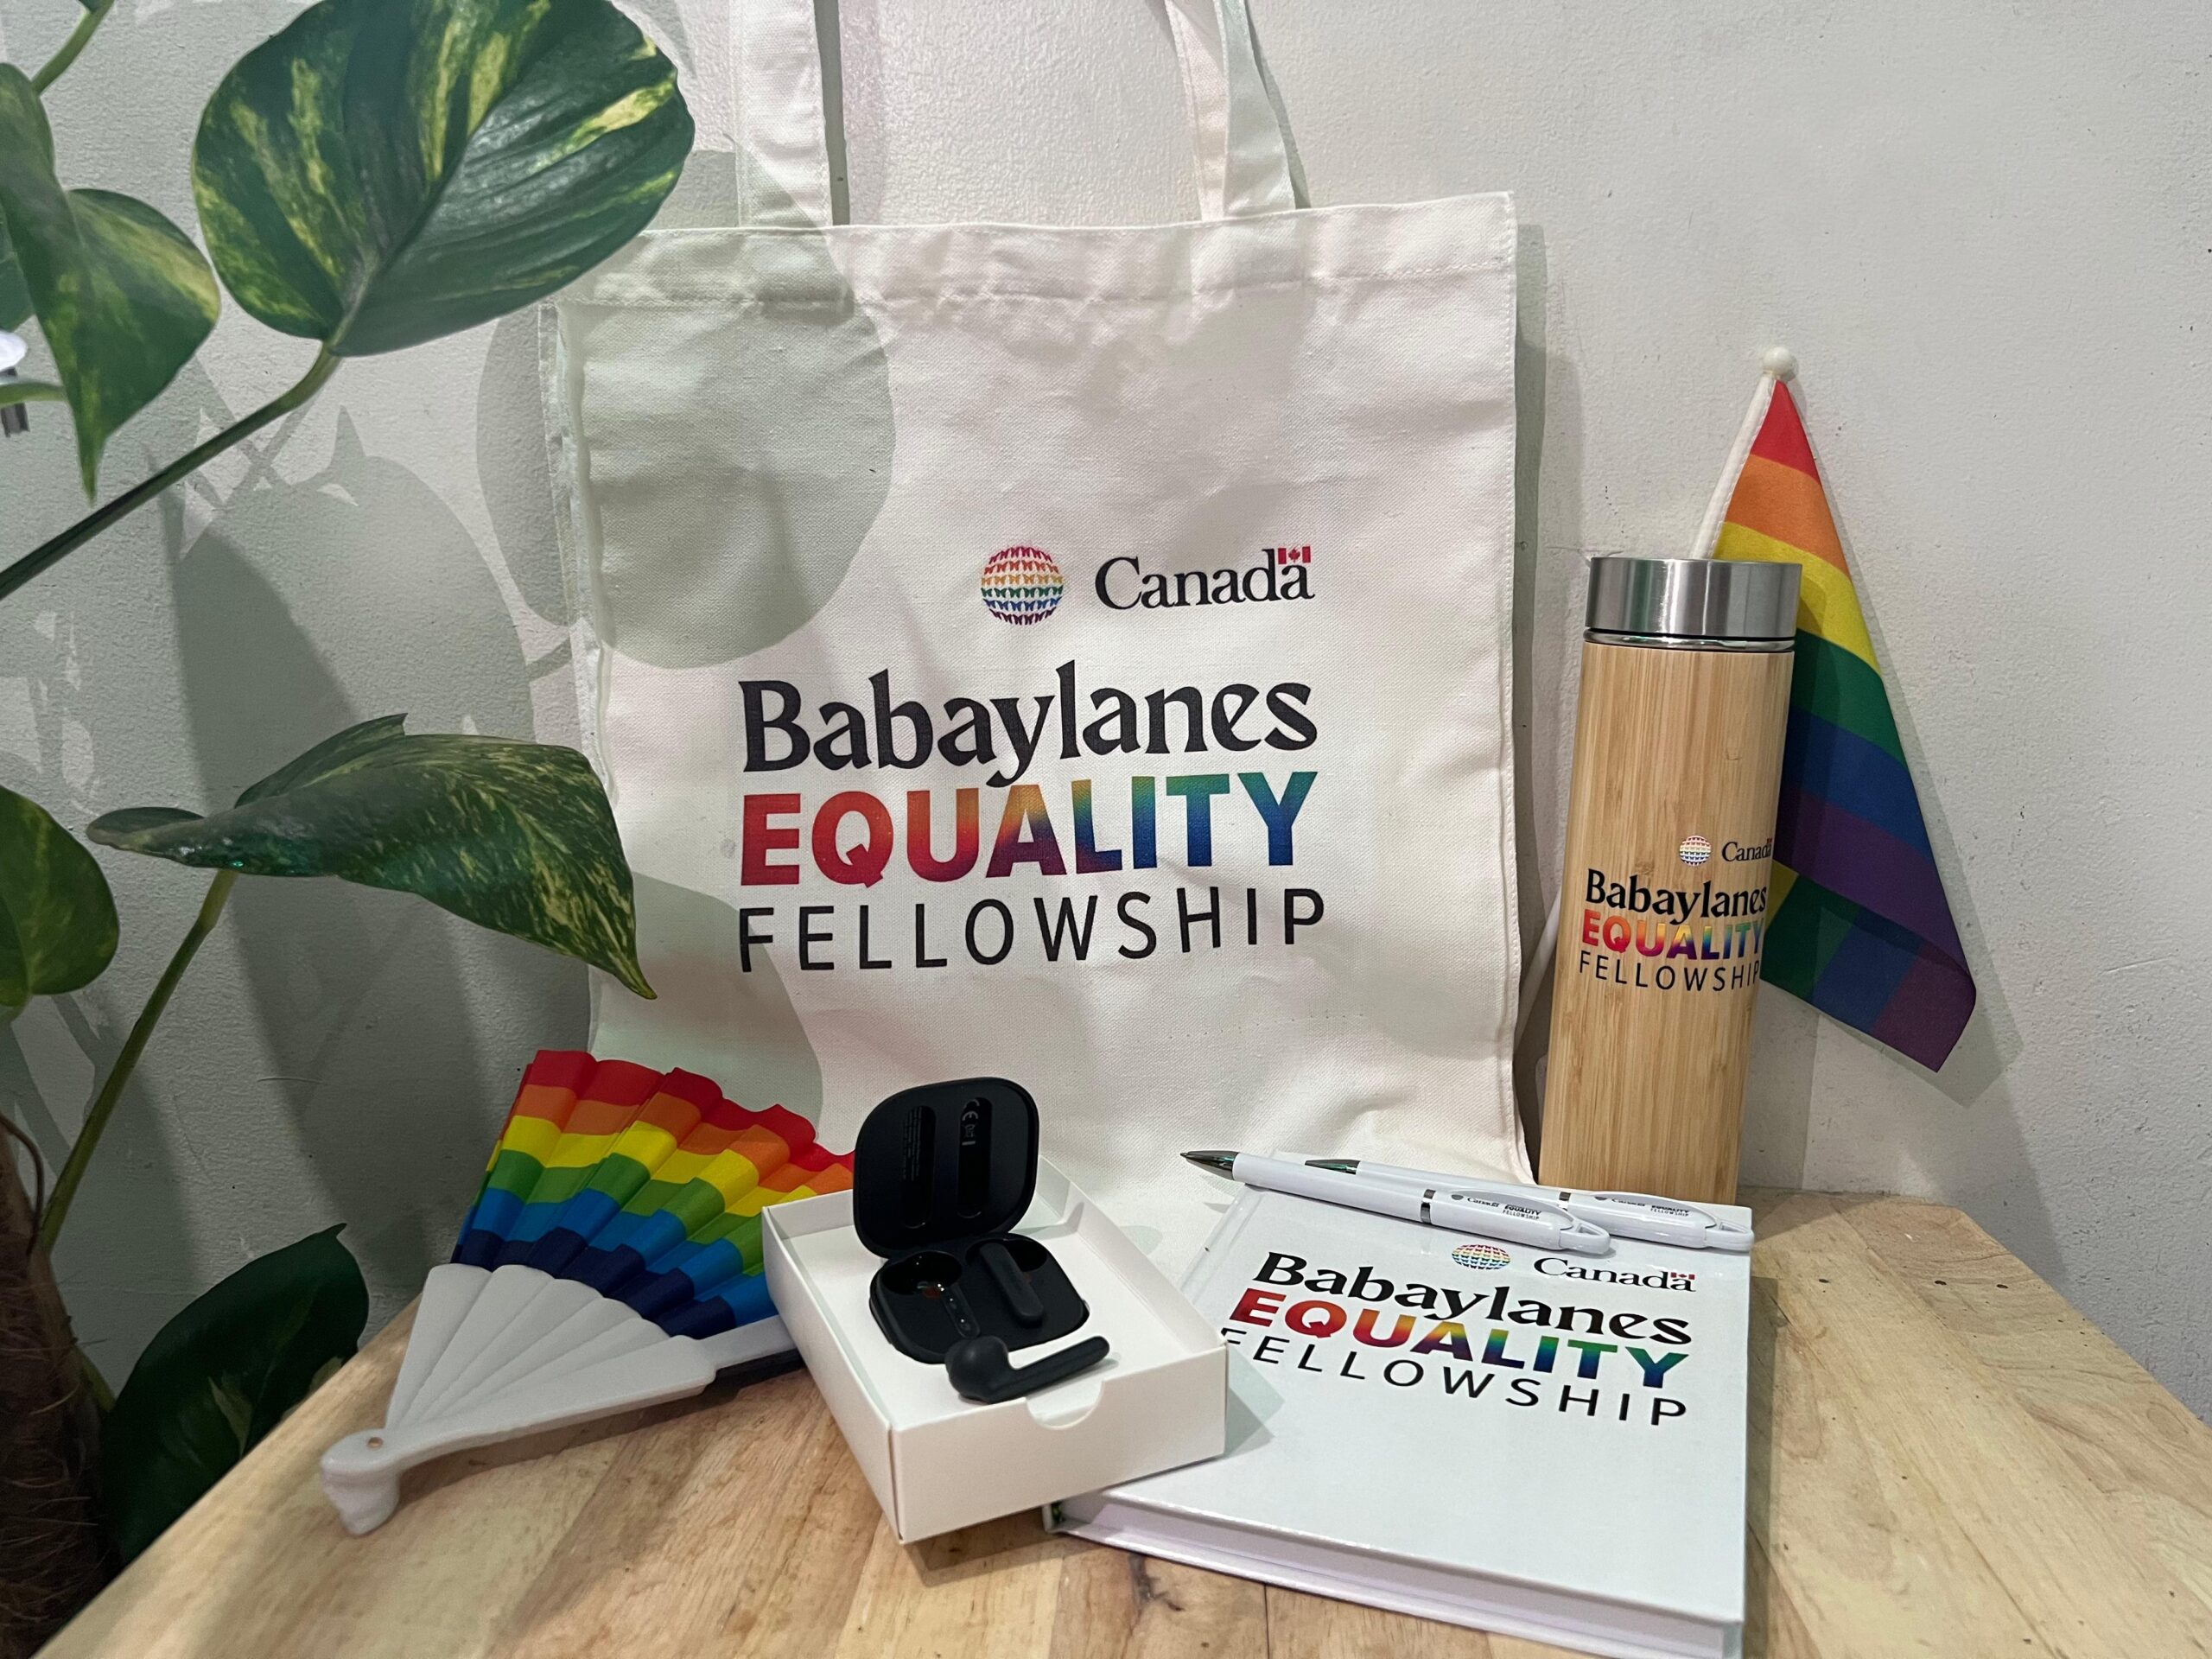 First Batch of Babaylanes Equality Fellows to be Announced Soon